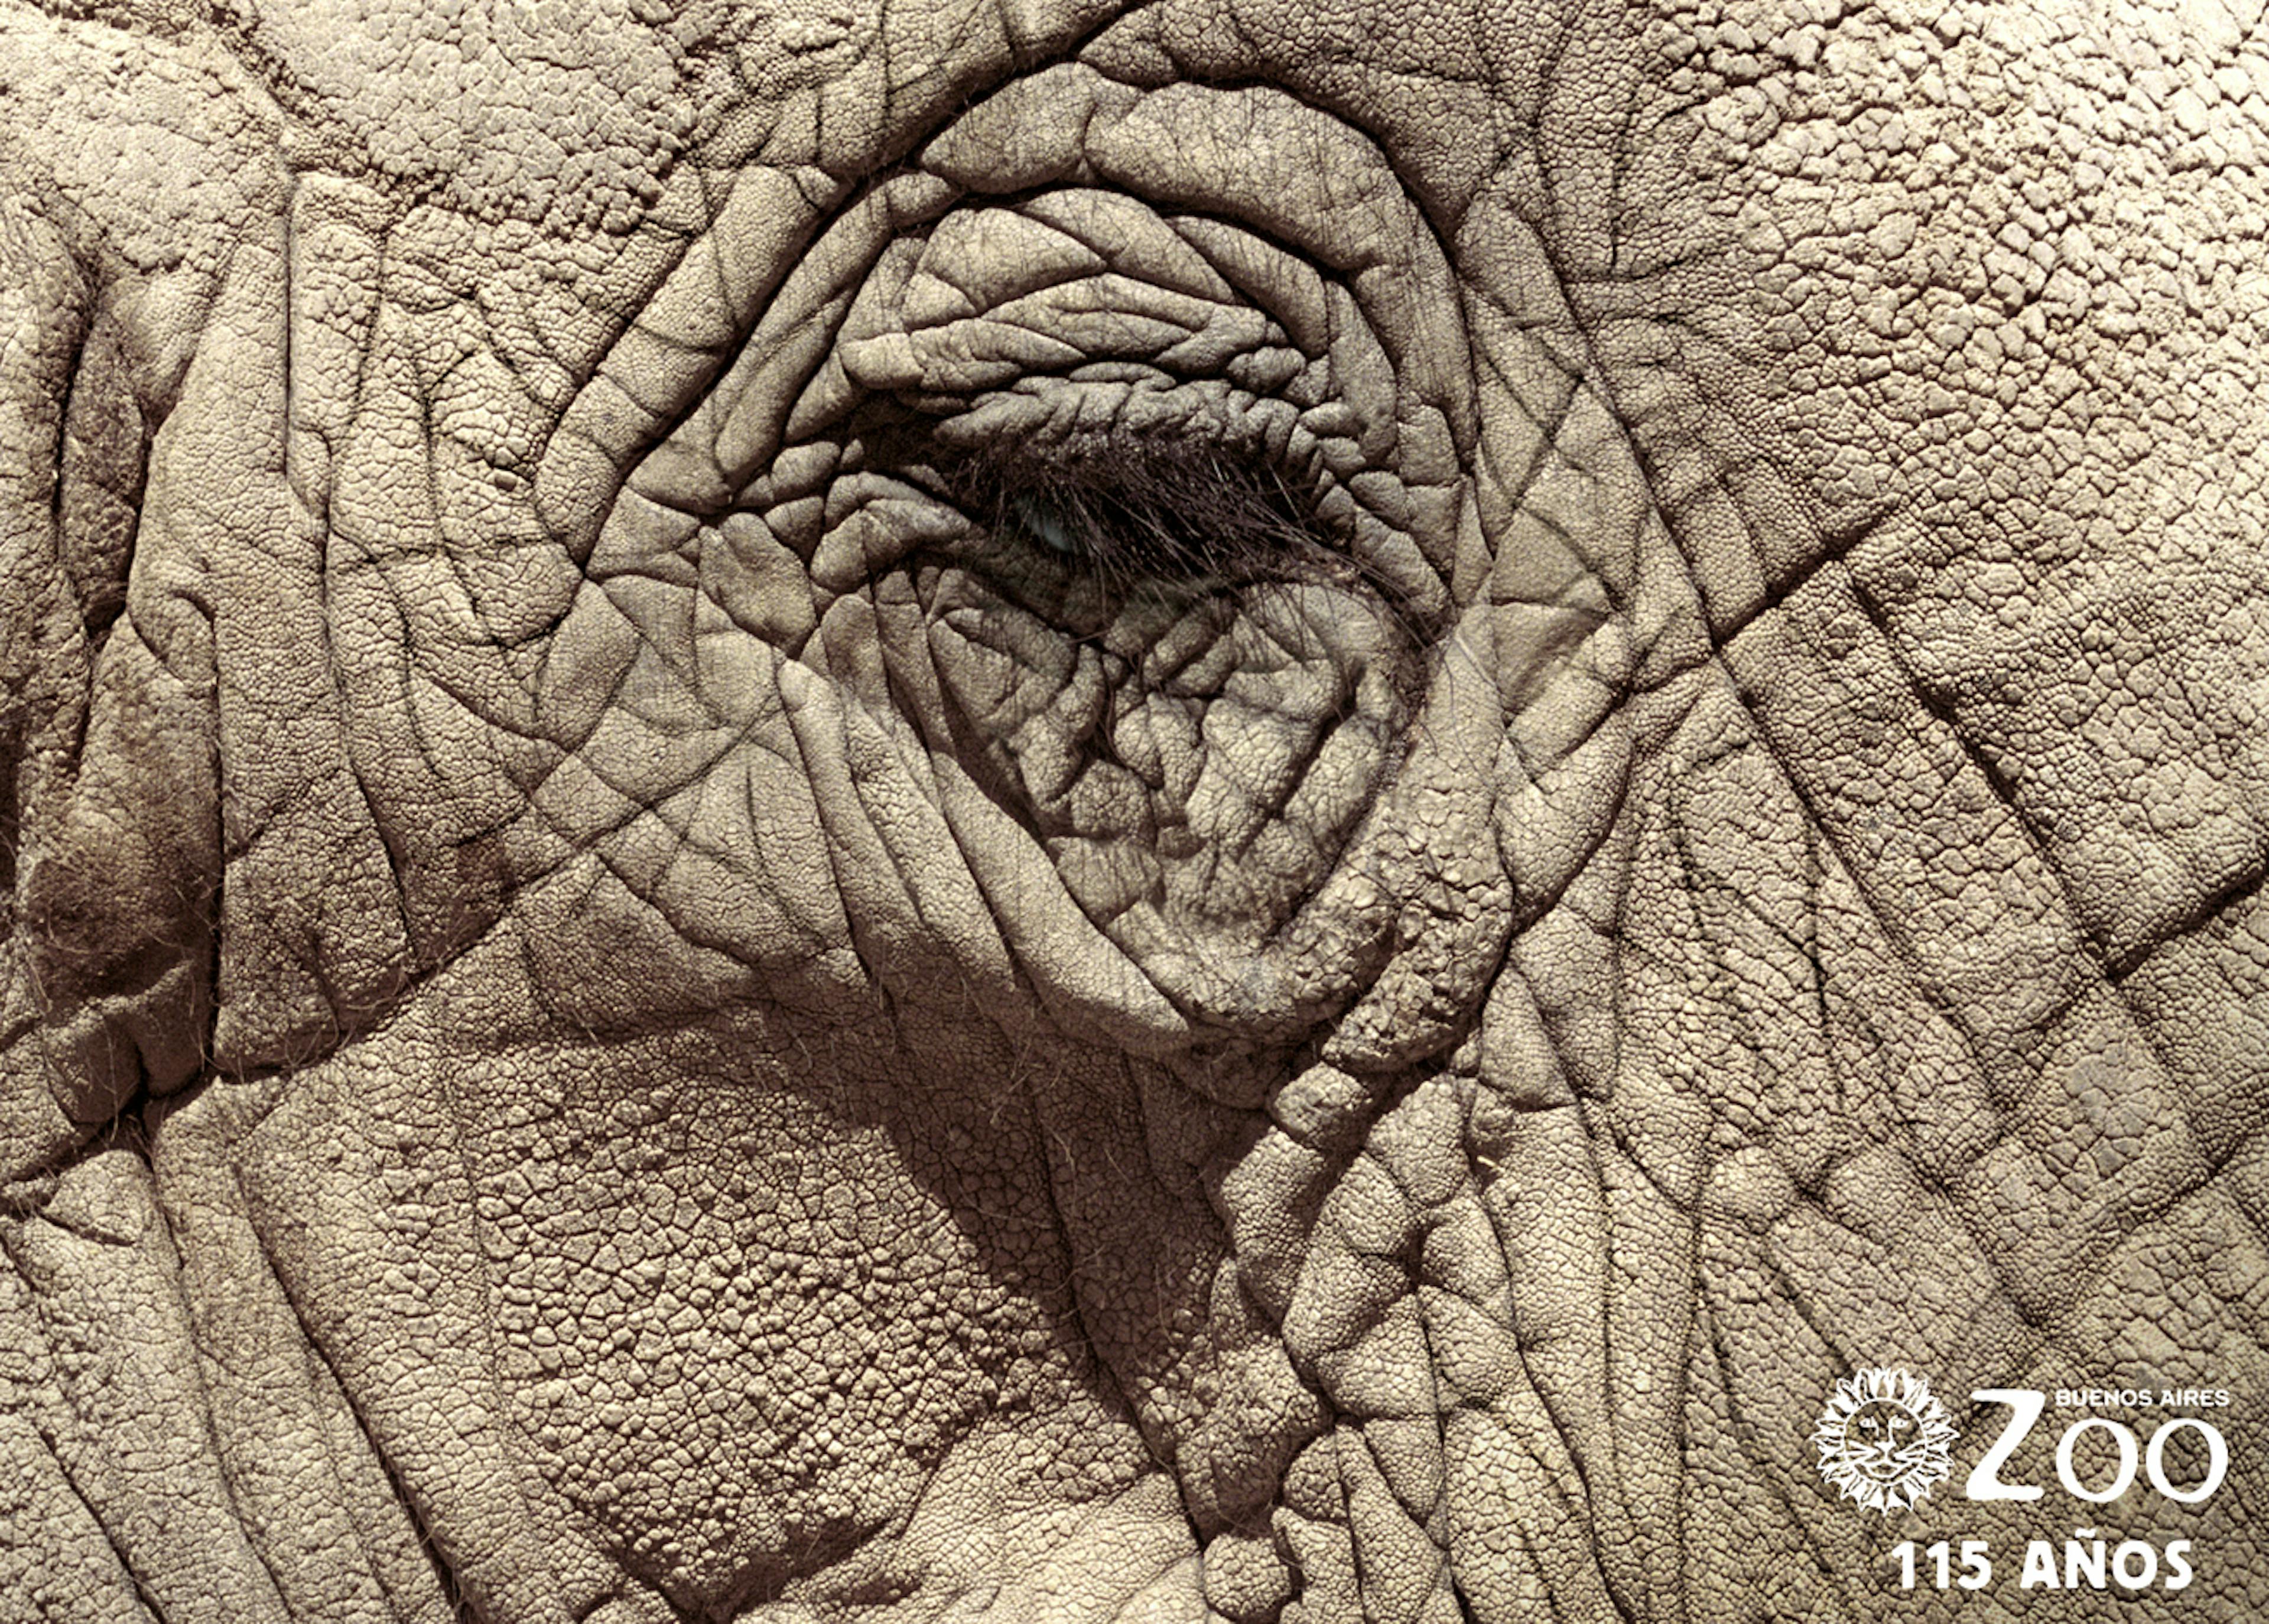 Ad for Buenos Aires Zoo with elephant